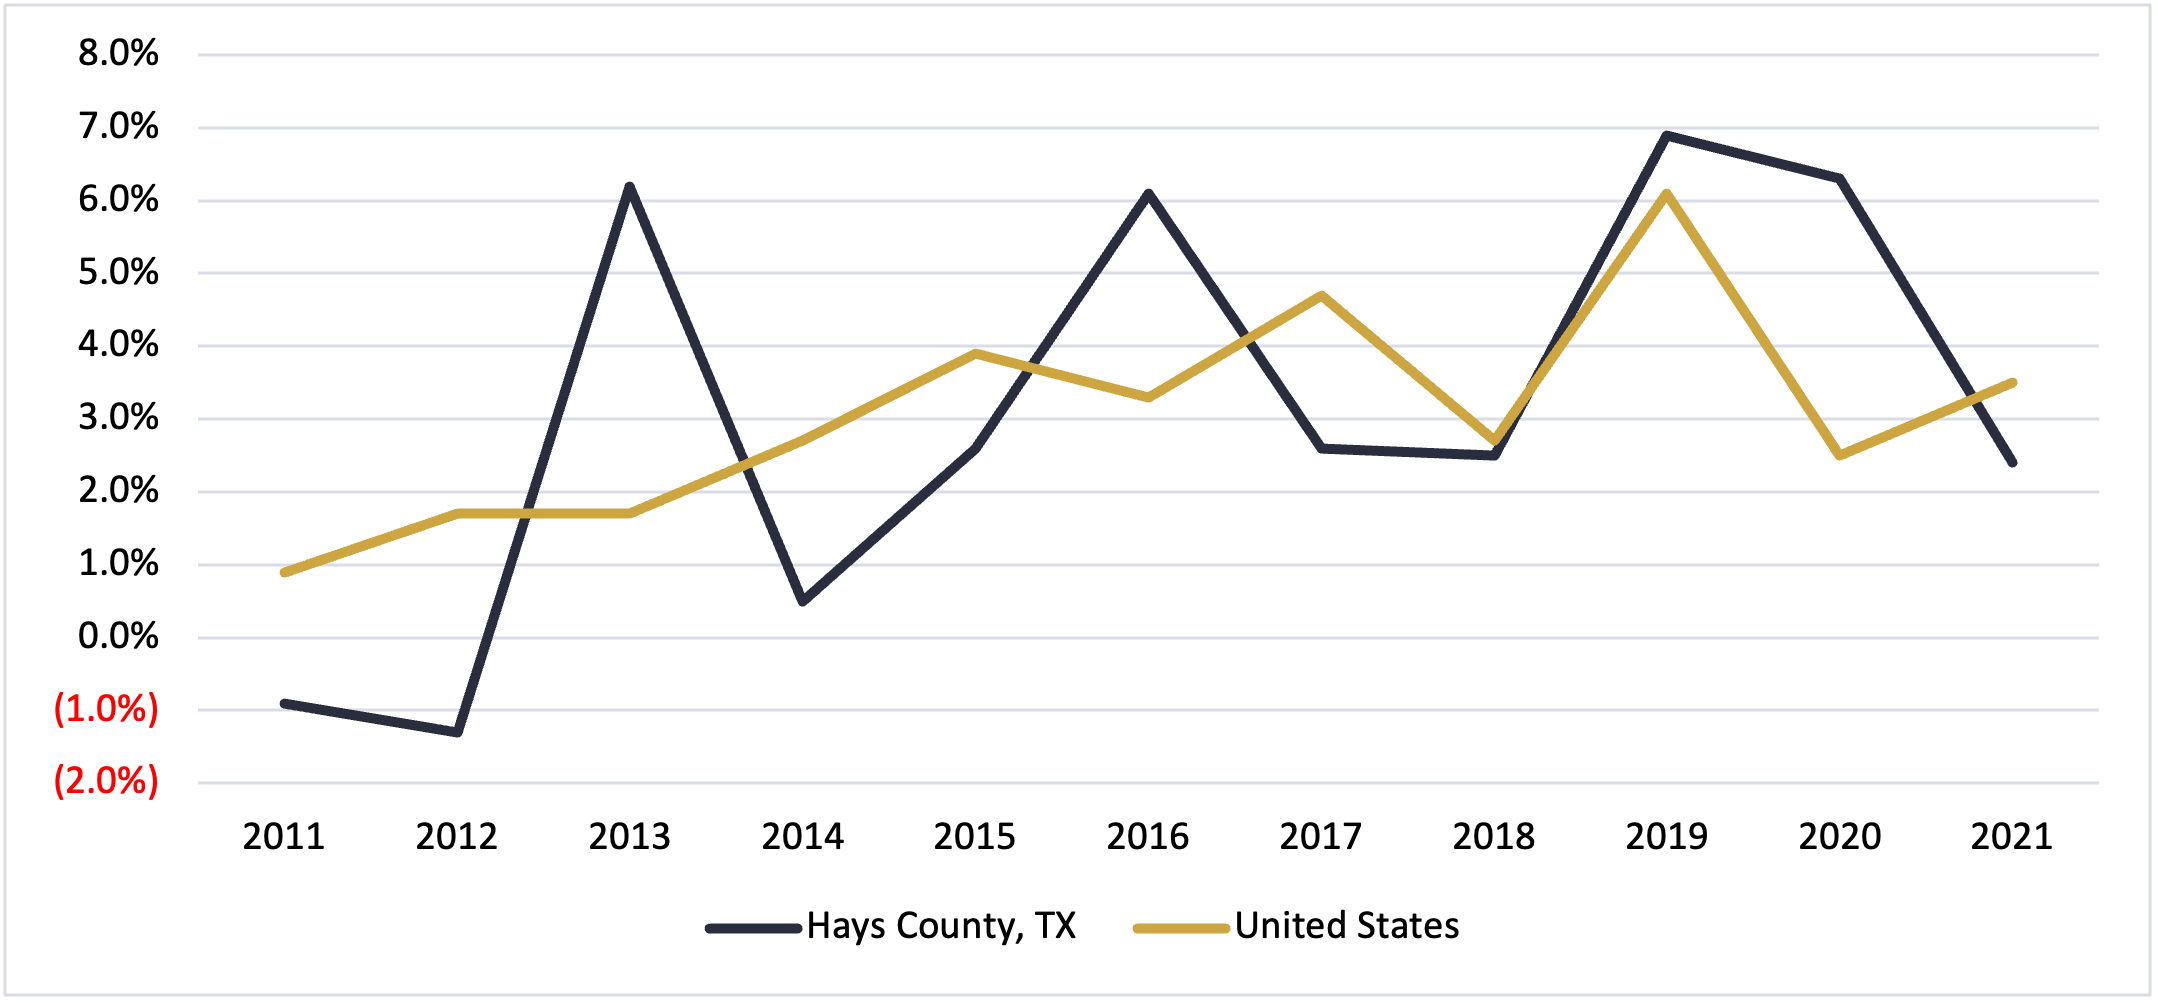 Hays County Texas Median Household Income 2021